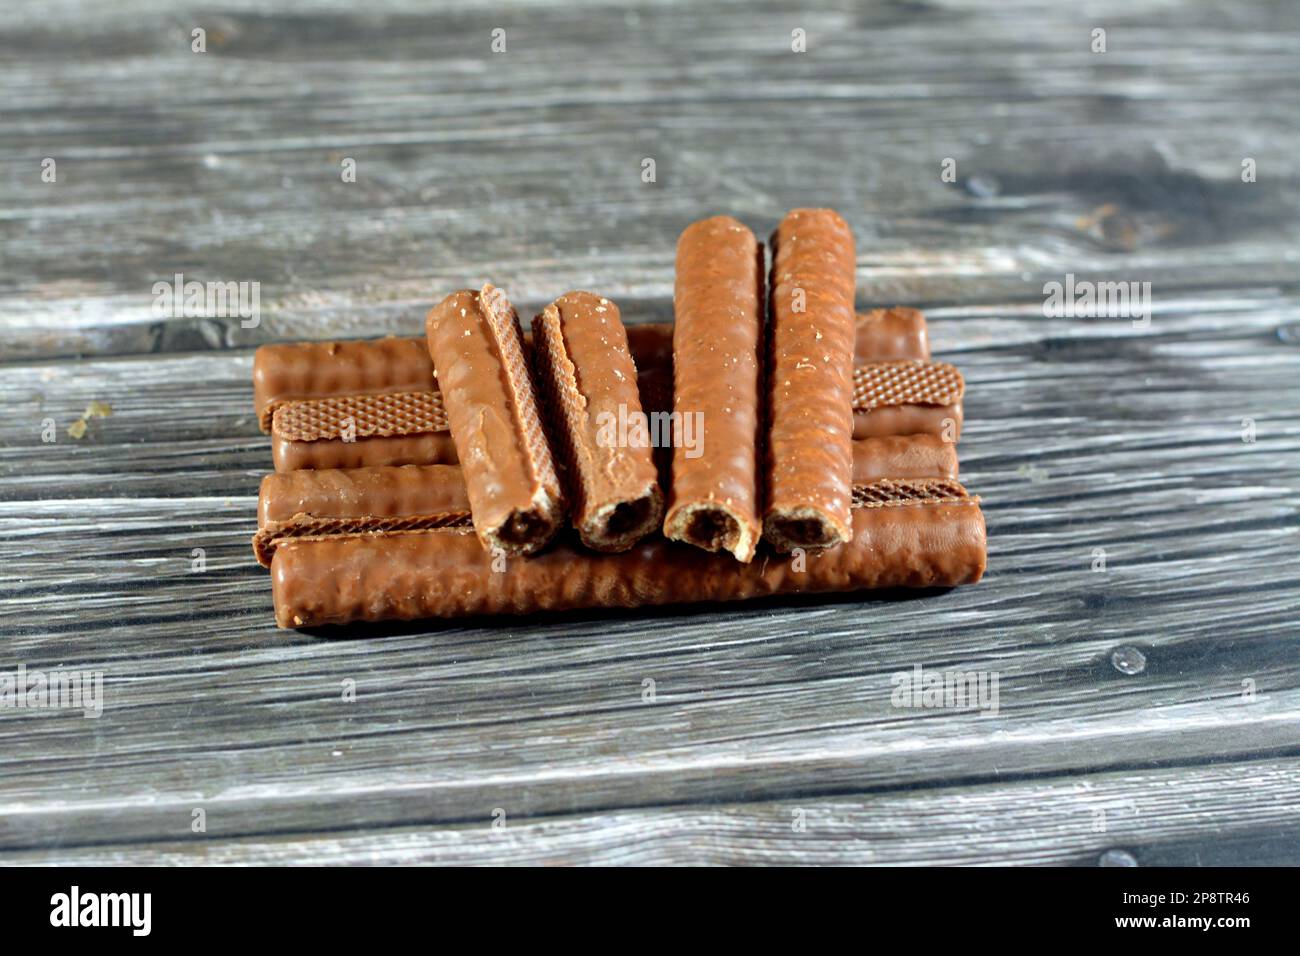 A creamy chocolate bars that has a velvety chocolate filling inside a wafer biscuit, biscuits covered and stuffed with chocolate spread, selective foc Stock Photo